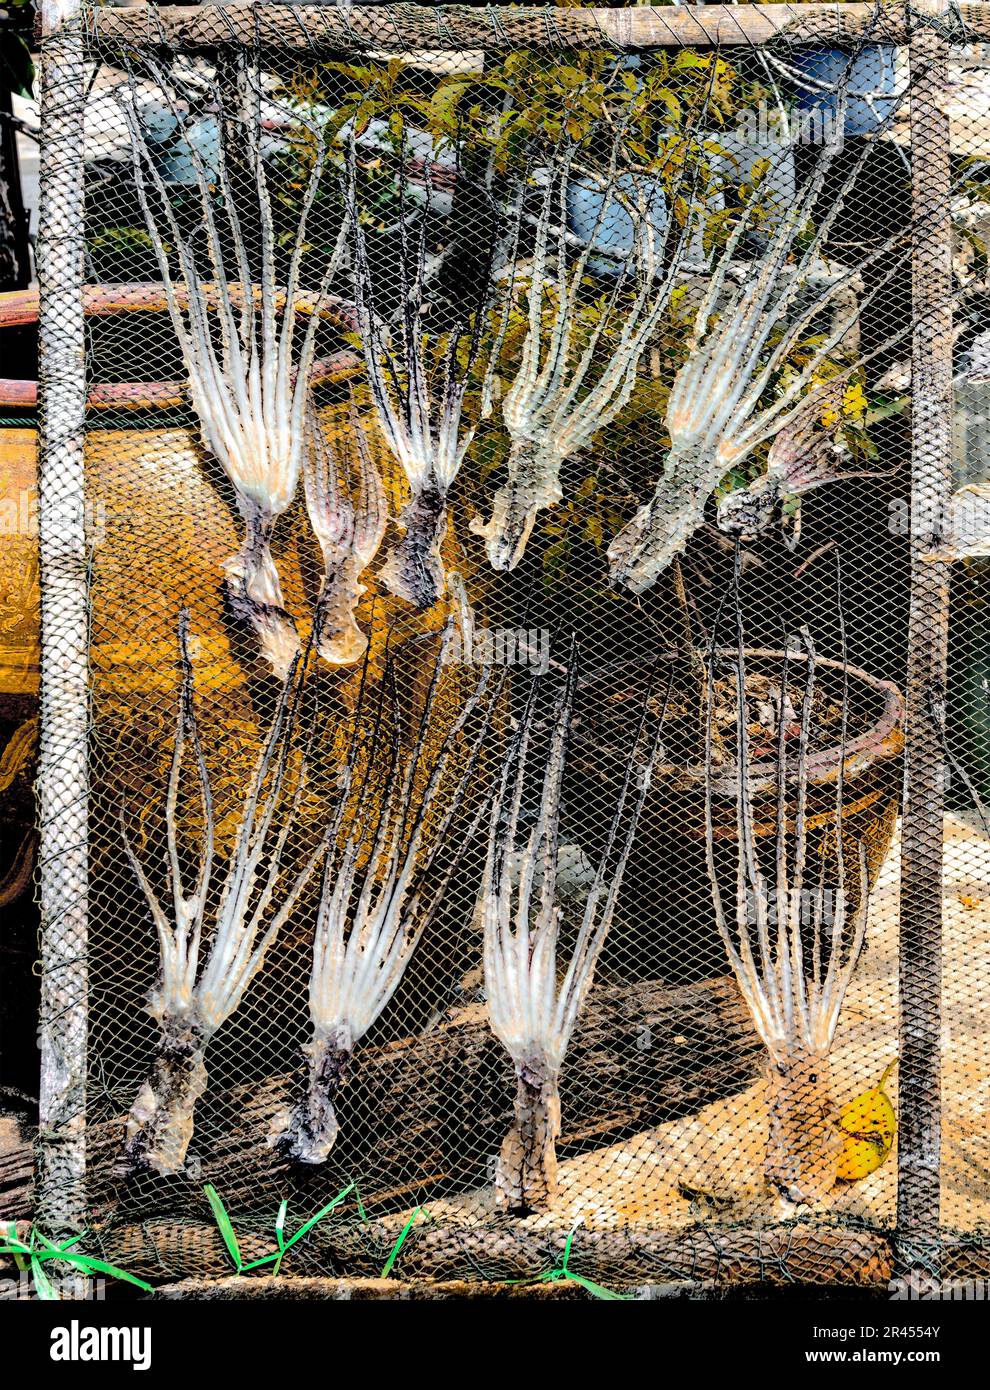 Sun Dry Octopuses. Octopuses rest on a chicken wire rack for sun drying. A simple and traditional way to dehydrate octopuses in Thailand. Stock Photo